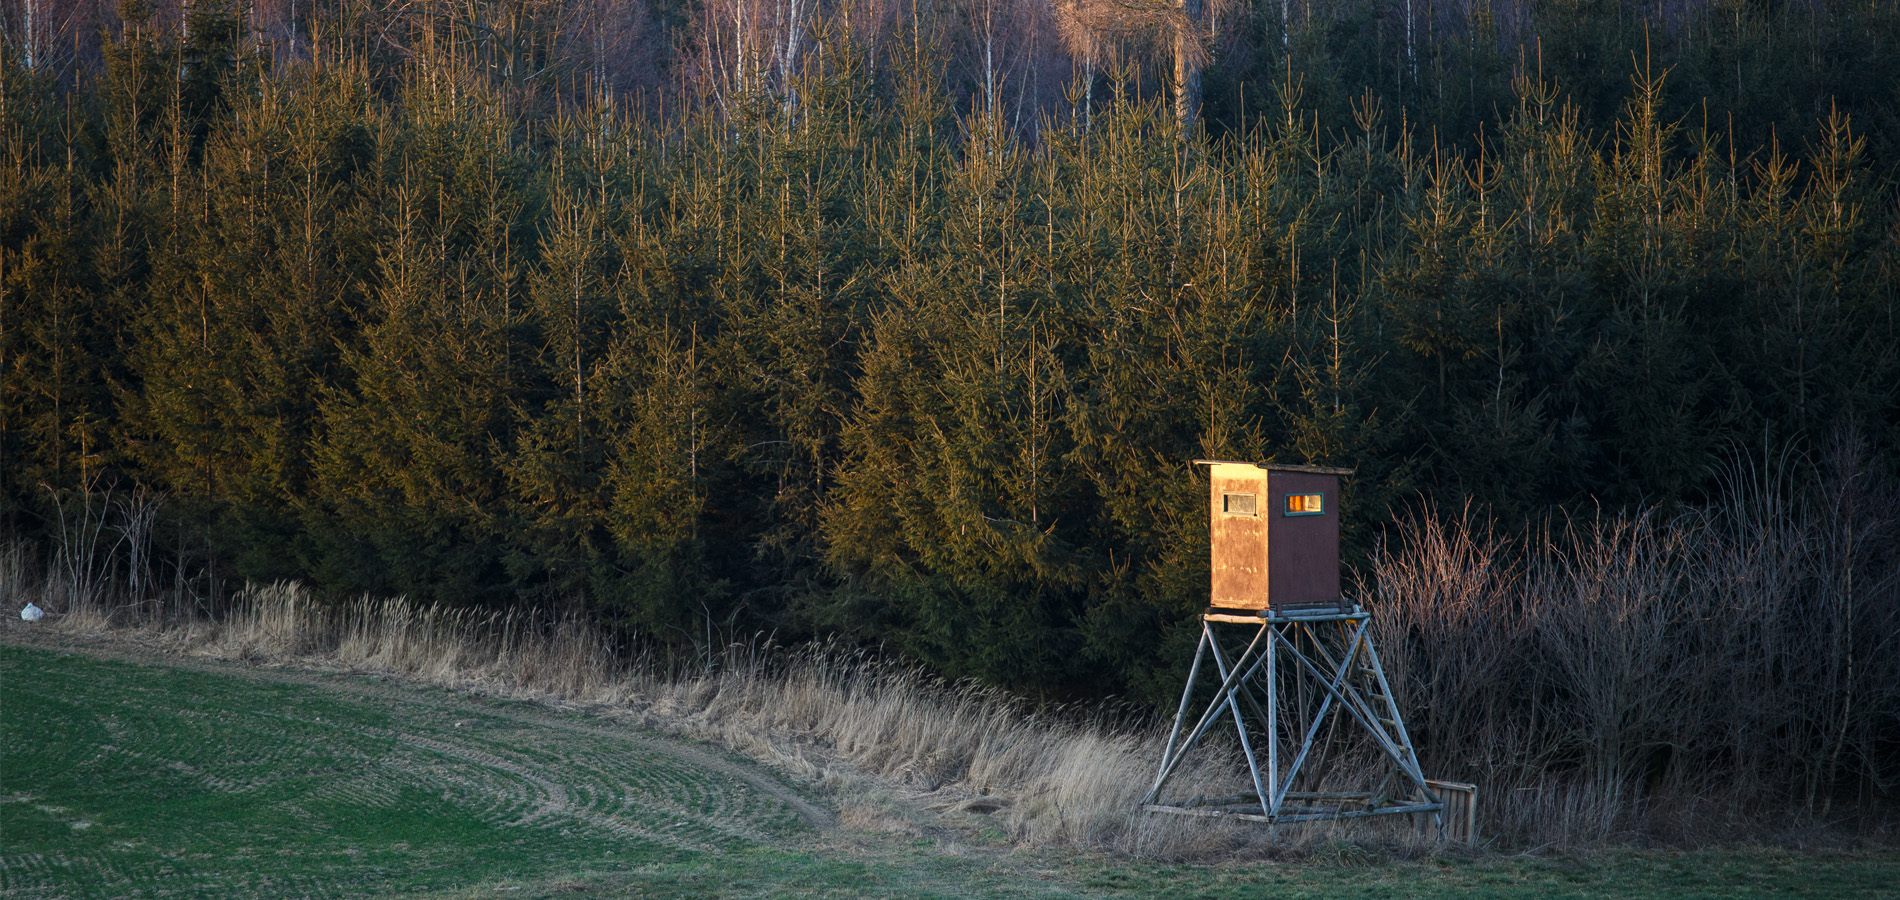 A deer stand at the edge of a field